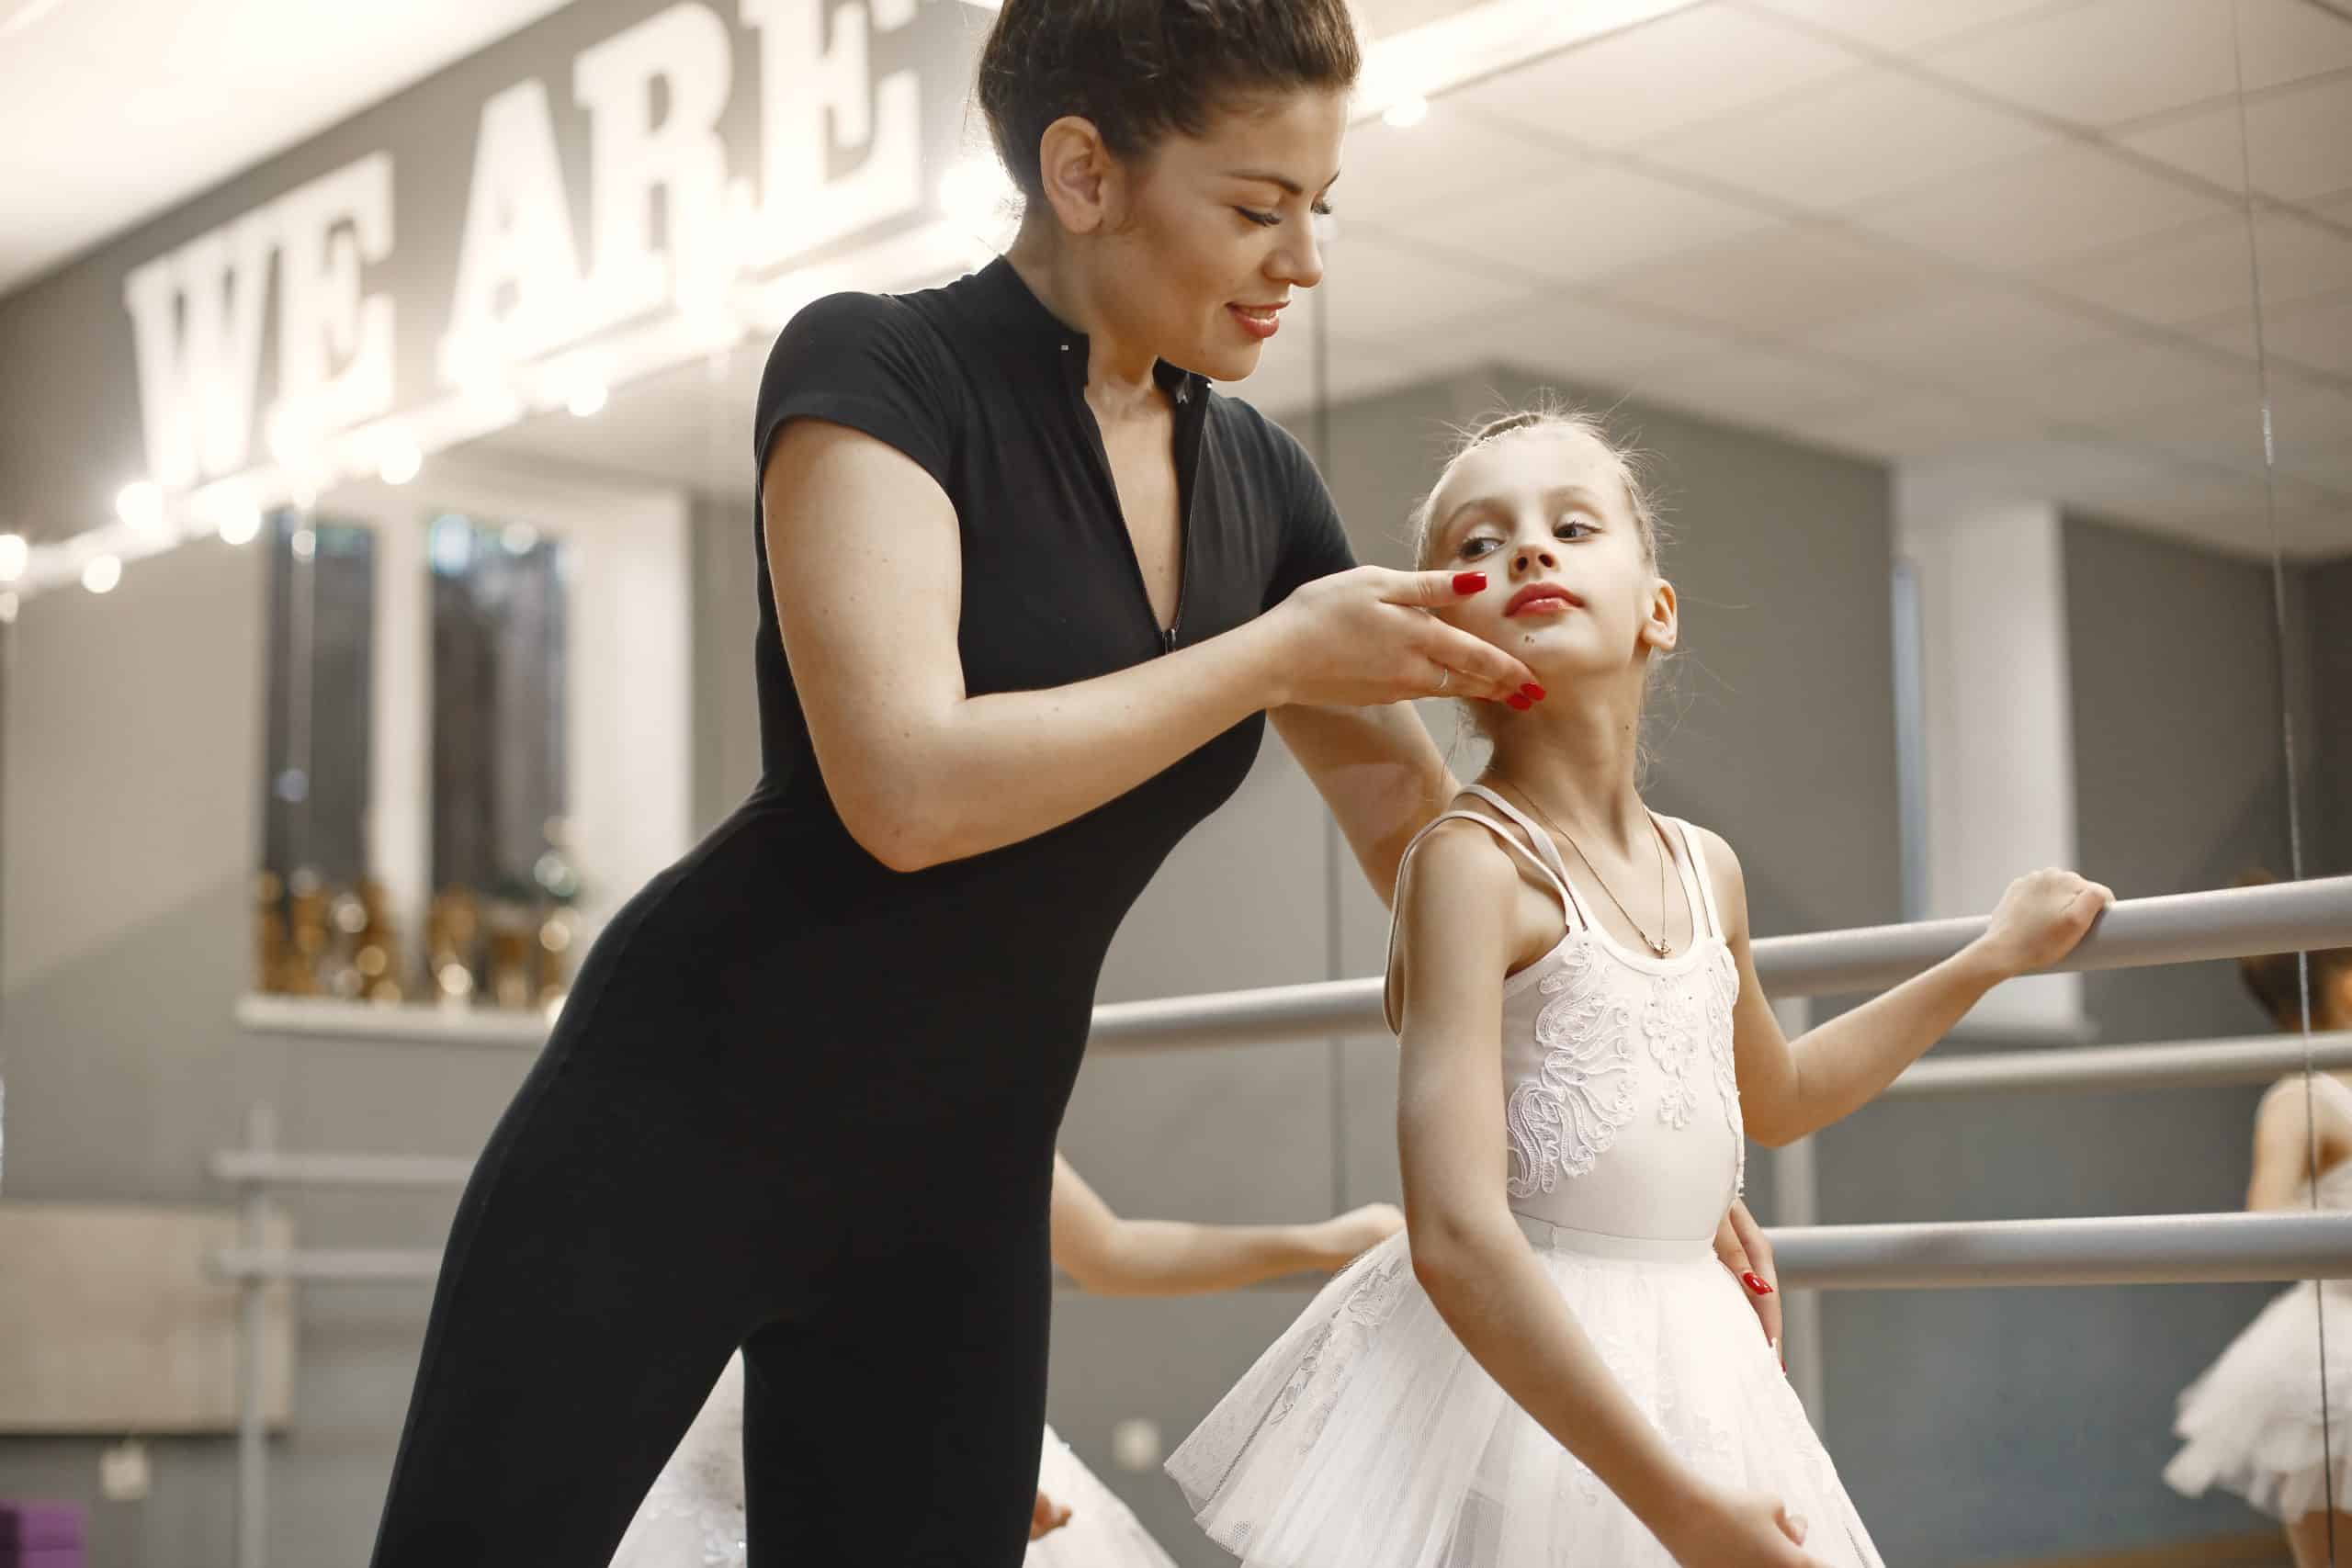 Tips for helping your child succeed in dance